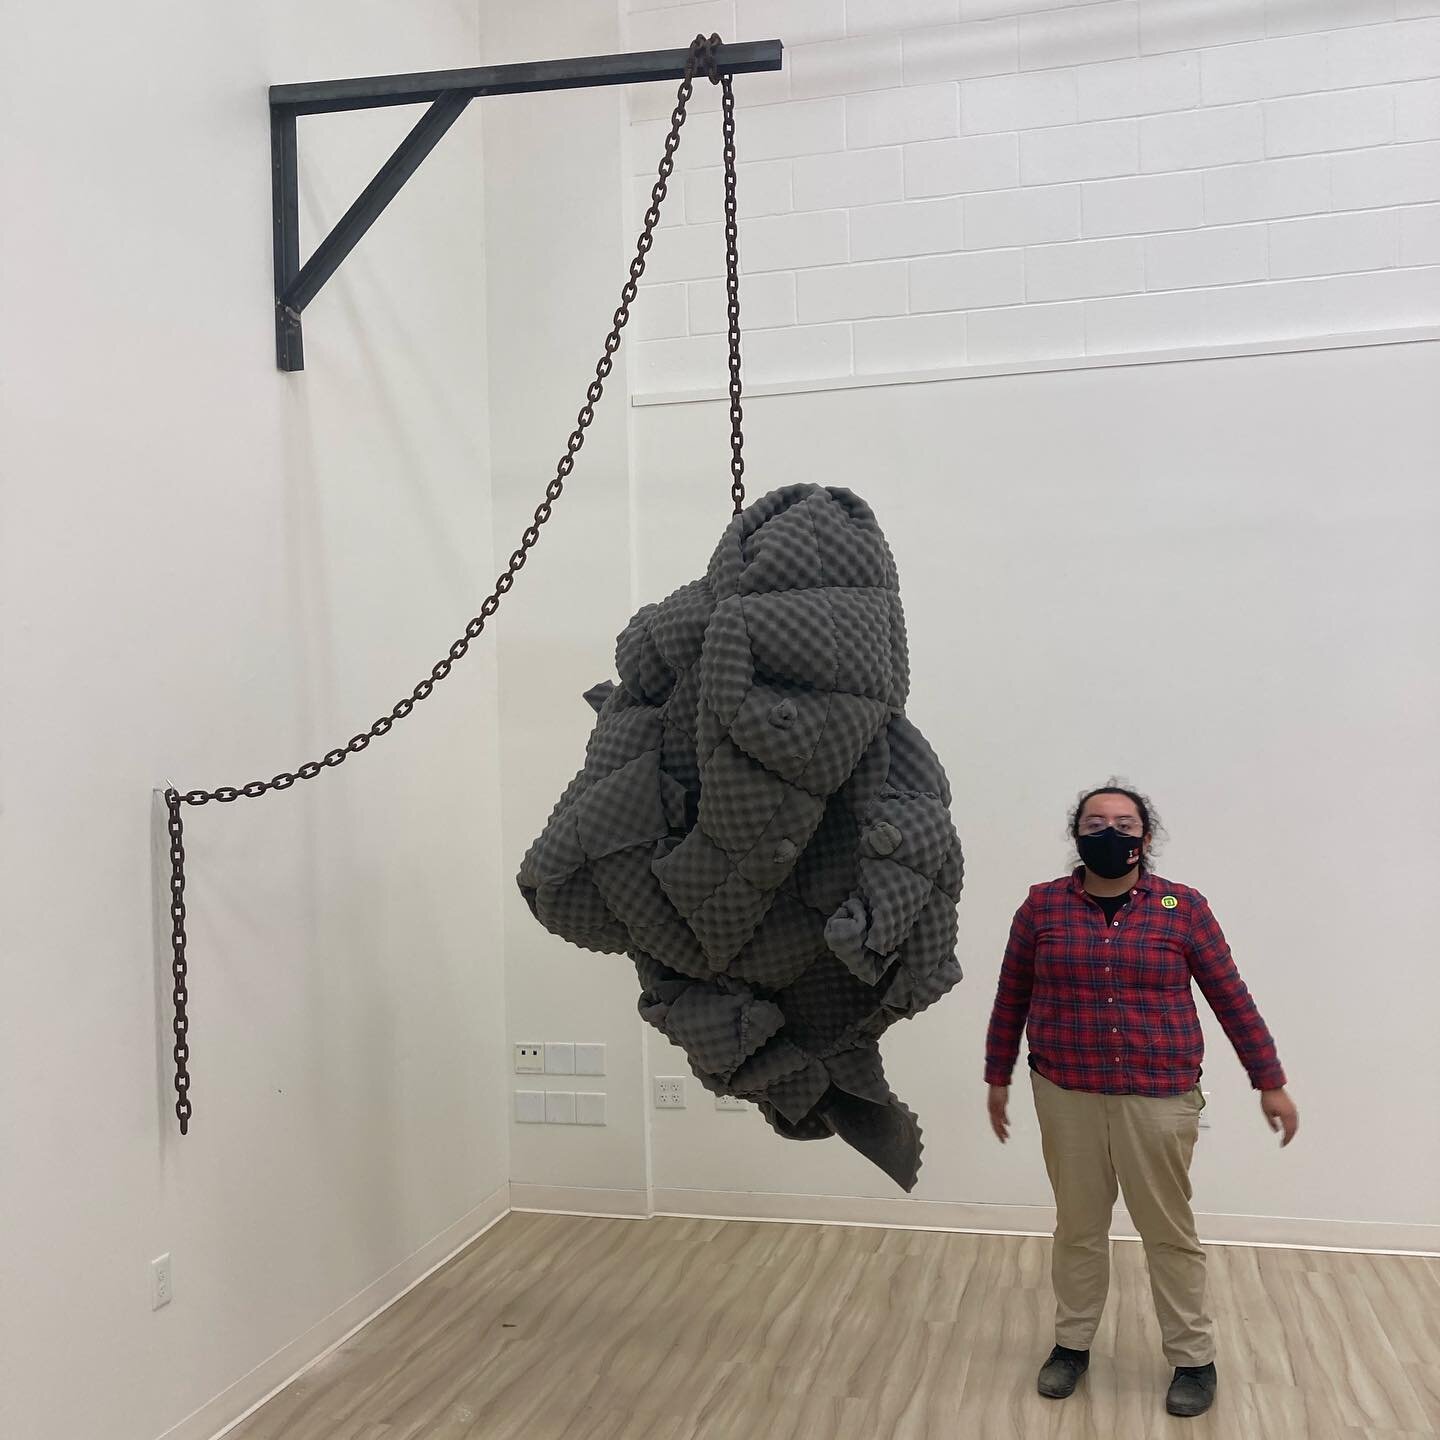 Install shots of the sculpture faculty/grad show at Victoria college. Will have some better images later. Opening reception March 9th. @jakinegreros @amelia.c.key @oliviahinkel @hillstudioart @lbajuyo @tamucc3d #victoriacollege